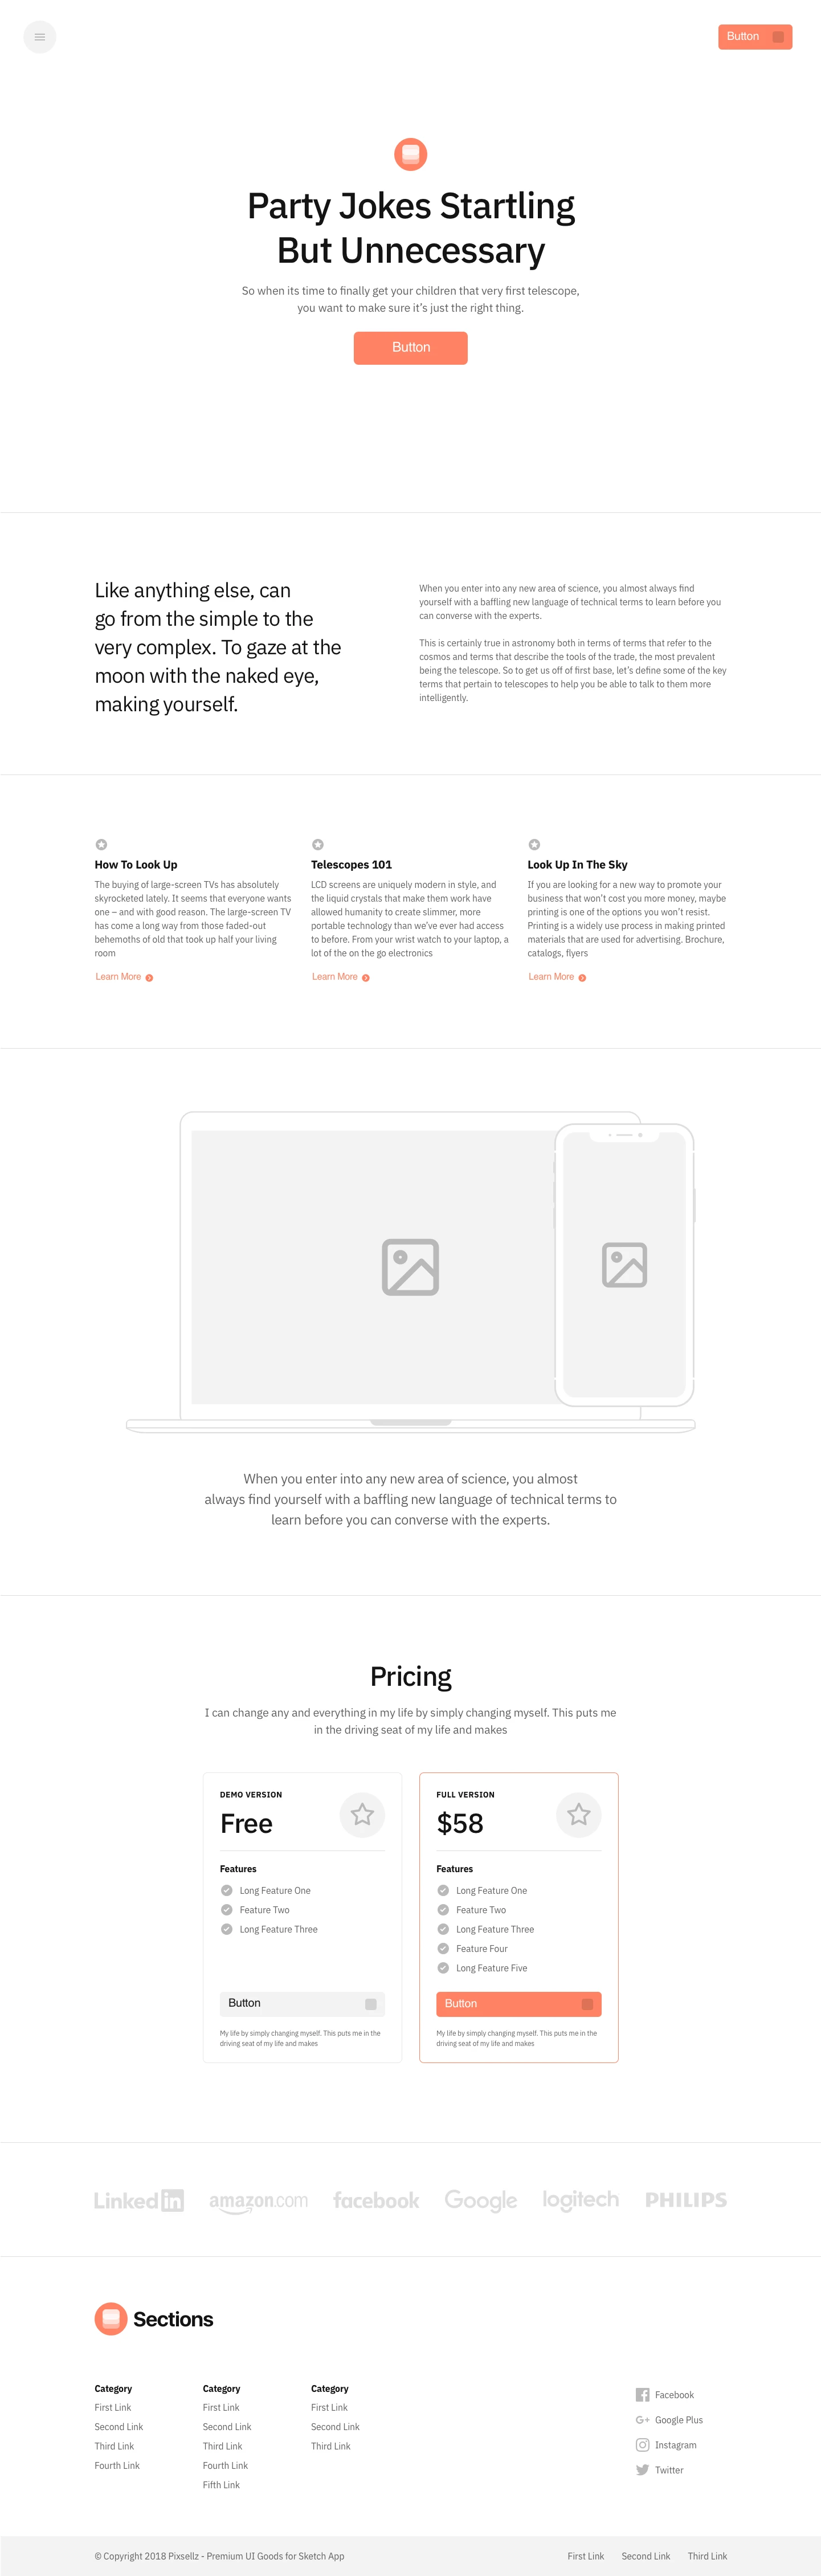 Sections - Landing Pages Wireframe Kit - Sections is made up of a large set of screens consisting of popular categories. This web UX screens will help you quickly create a prototype for web services.